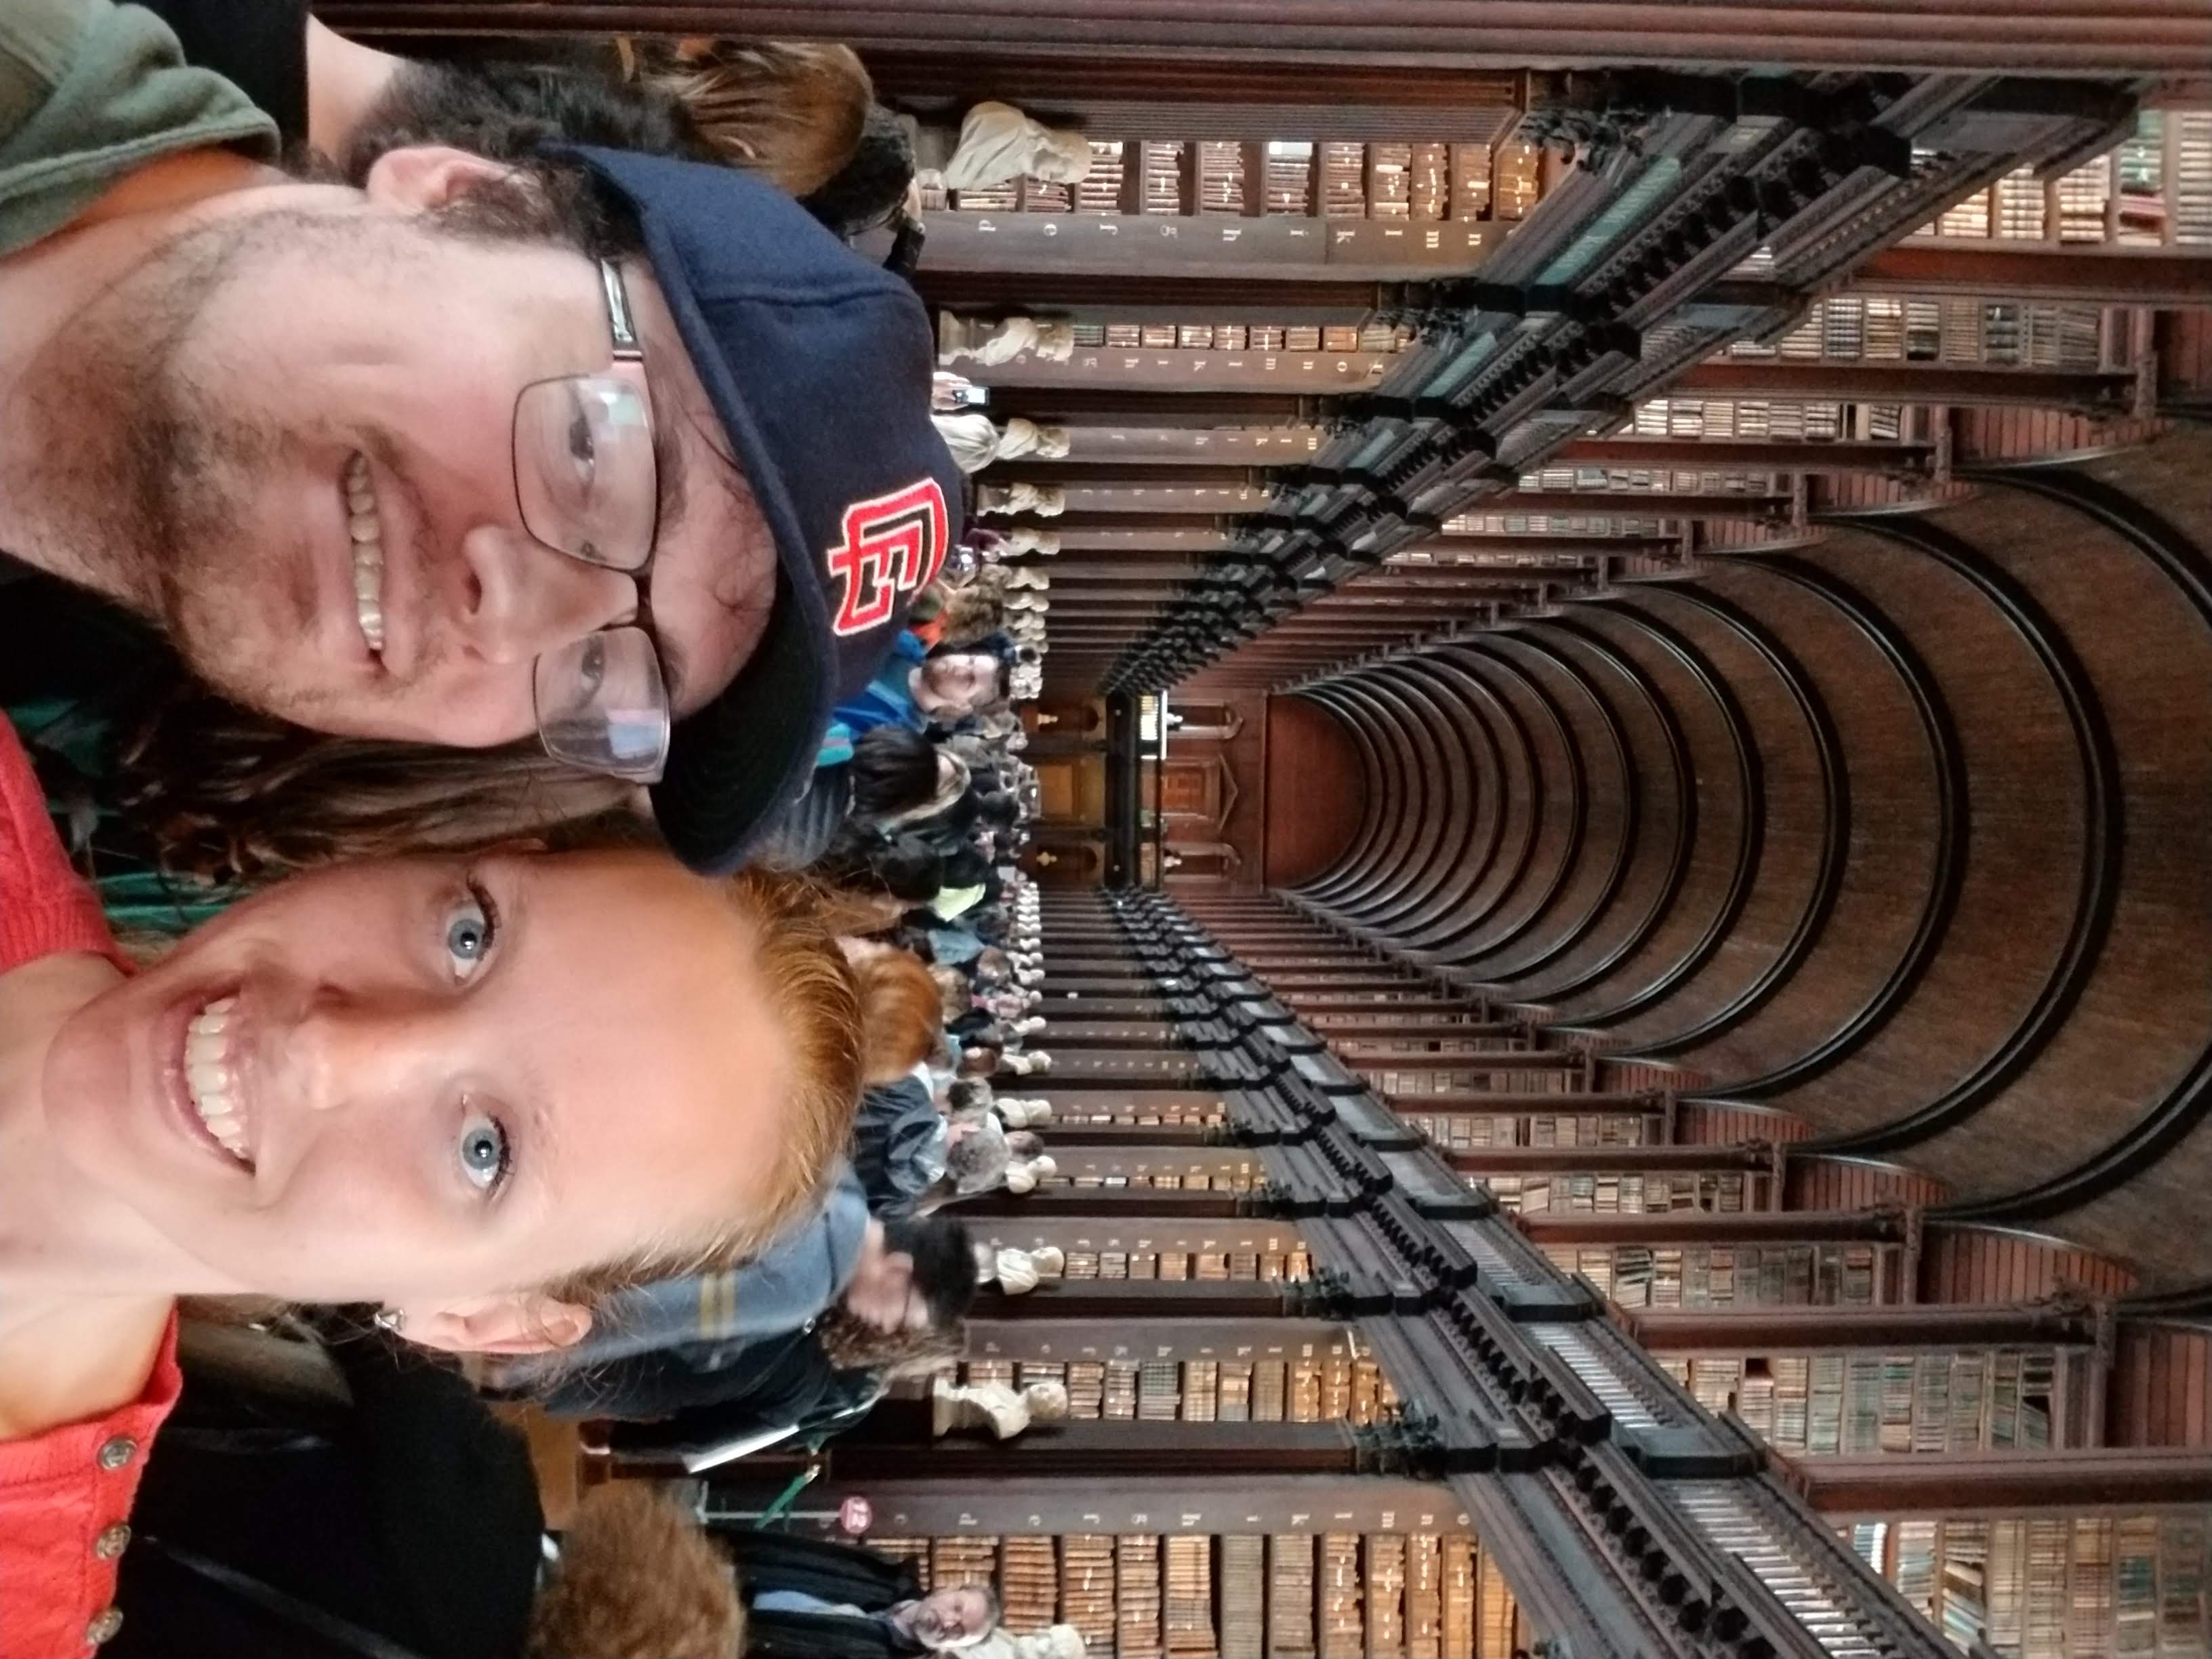 Author Jessica Dall stands with her partner in Trinity Library. Behind them are rows and rows of books on two separate floors and a large arched ceiling above, with statues lining the lower walkway. Many people are walking behind them.